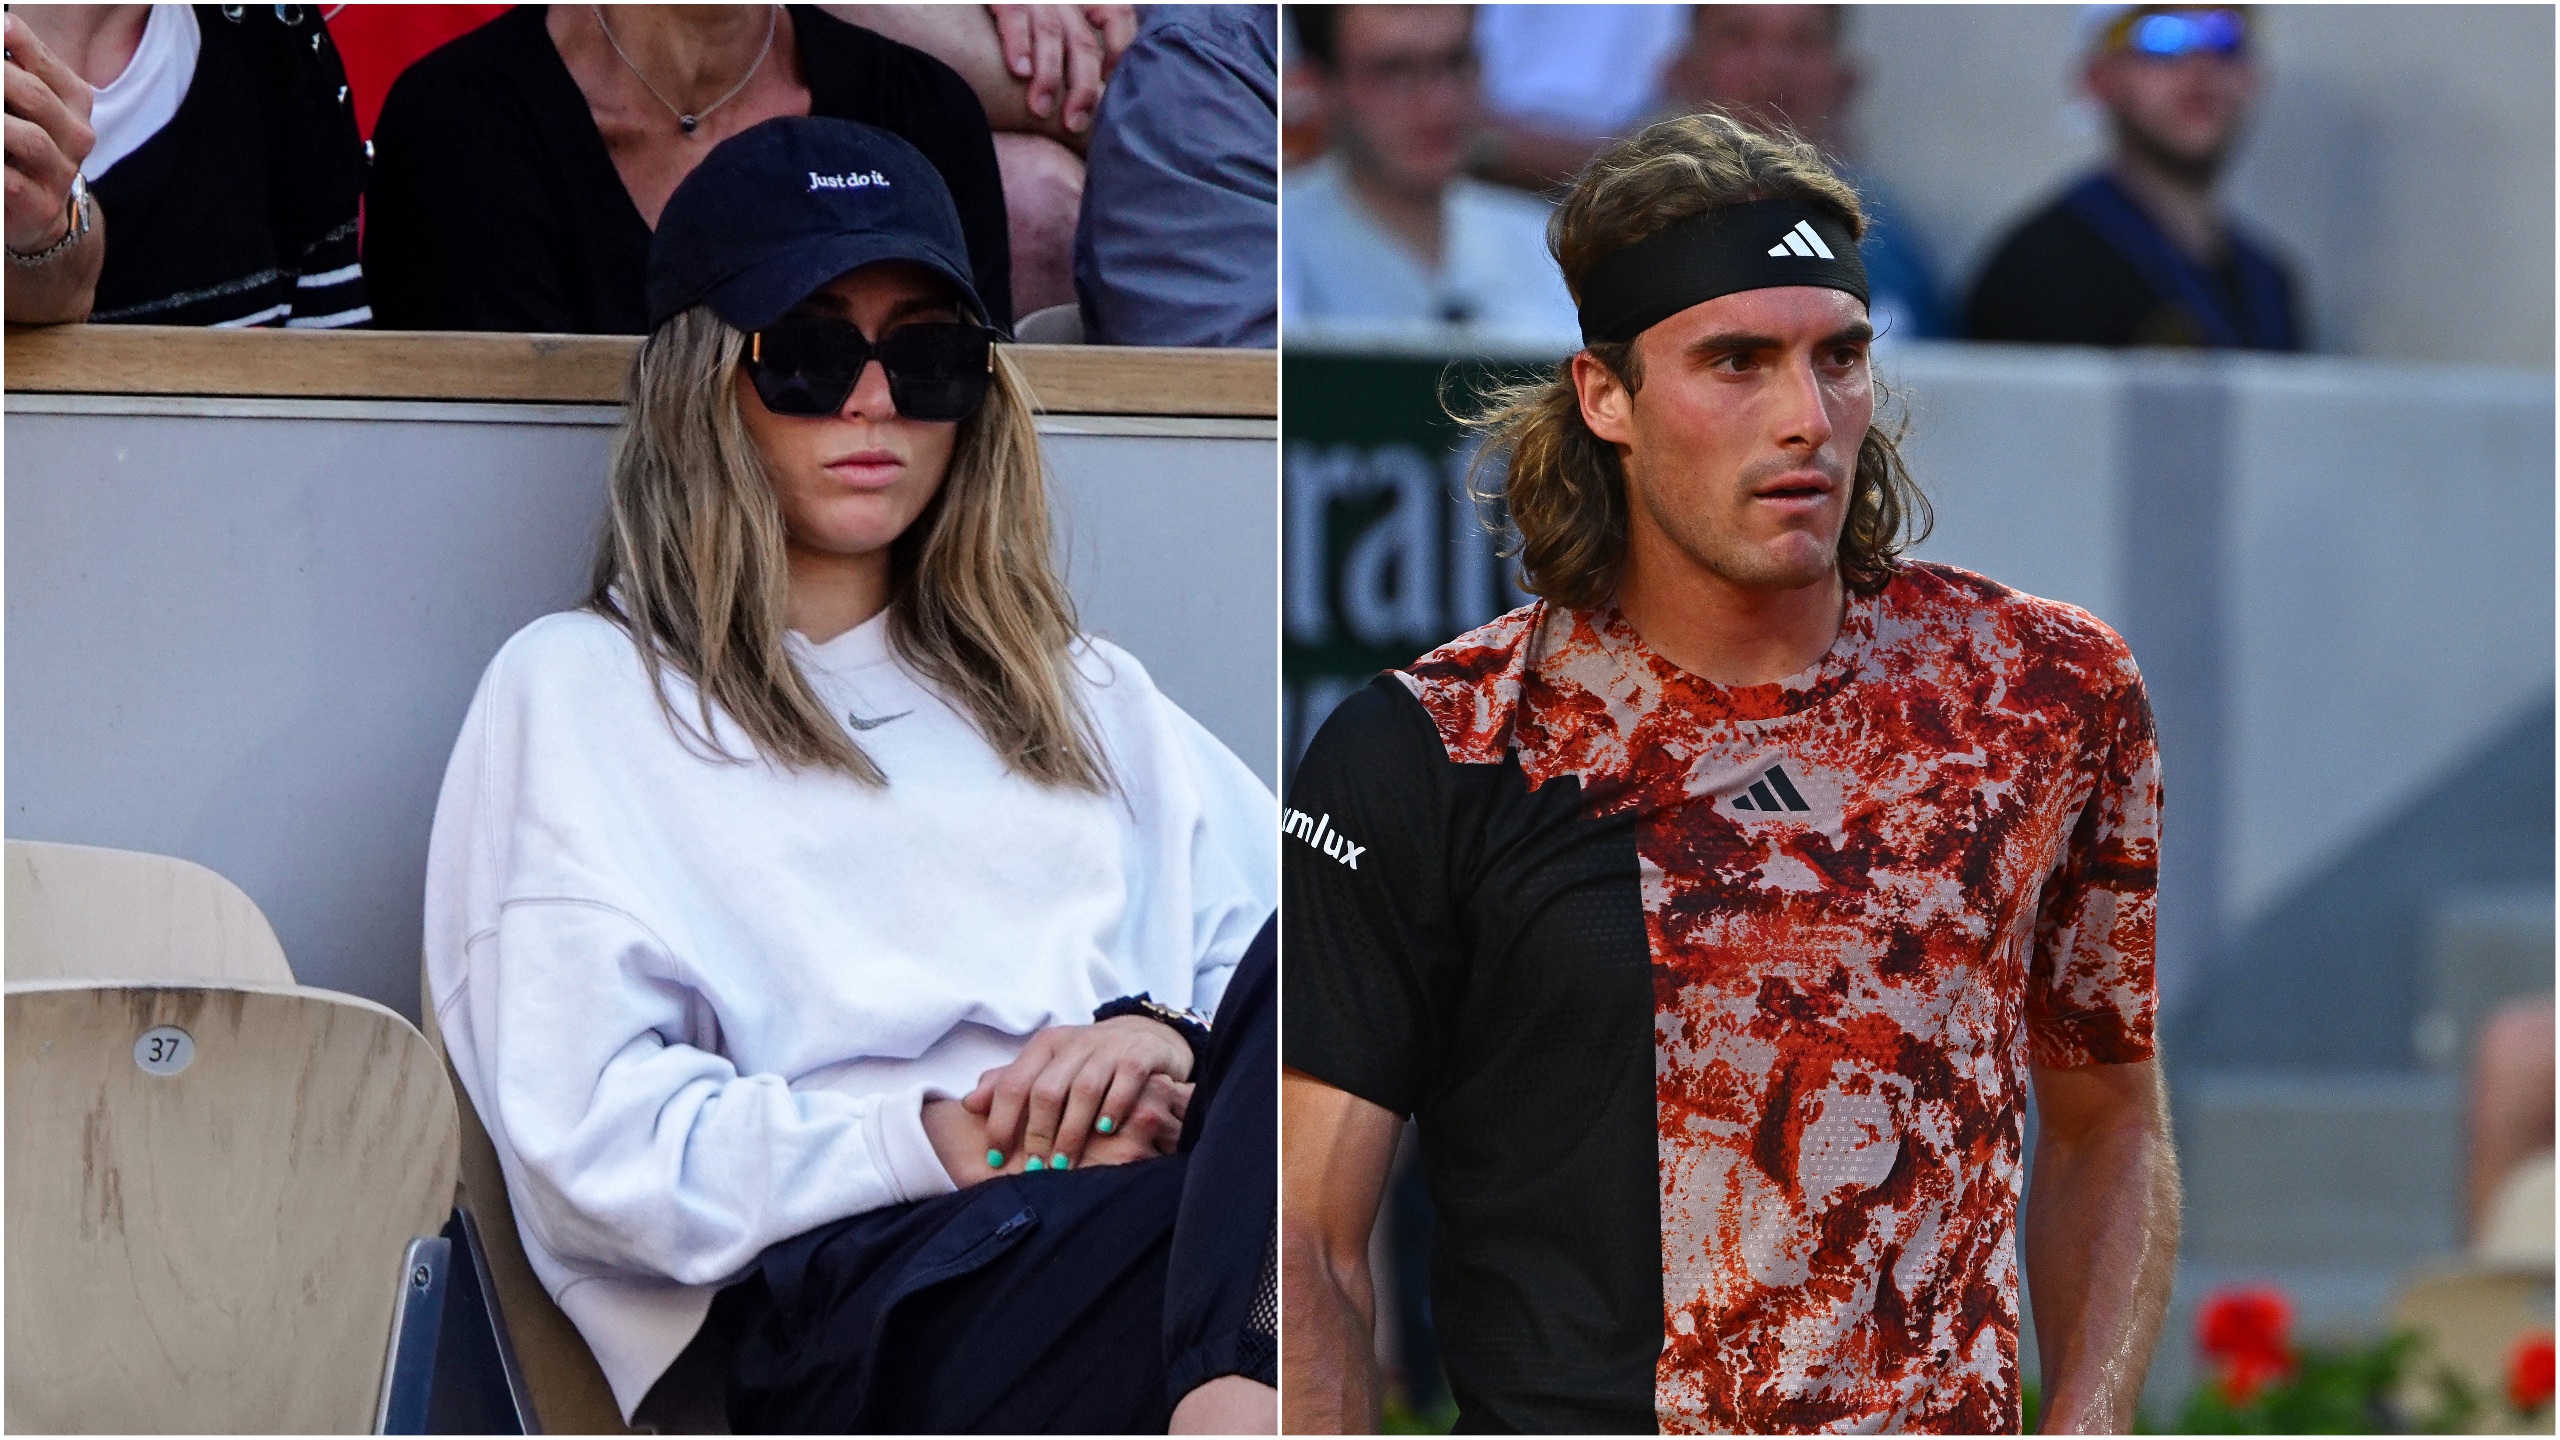 Did Paula Badosa and Stefanos Tsitsipas just announce a relationship…on